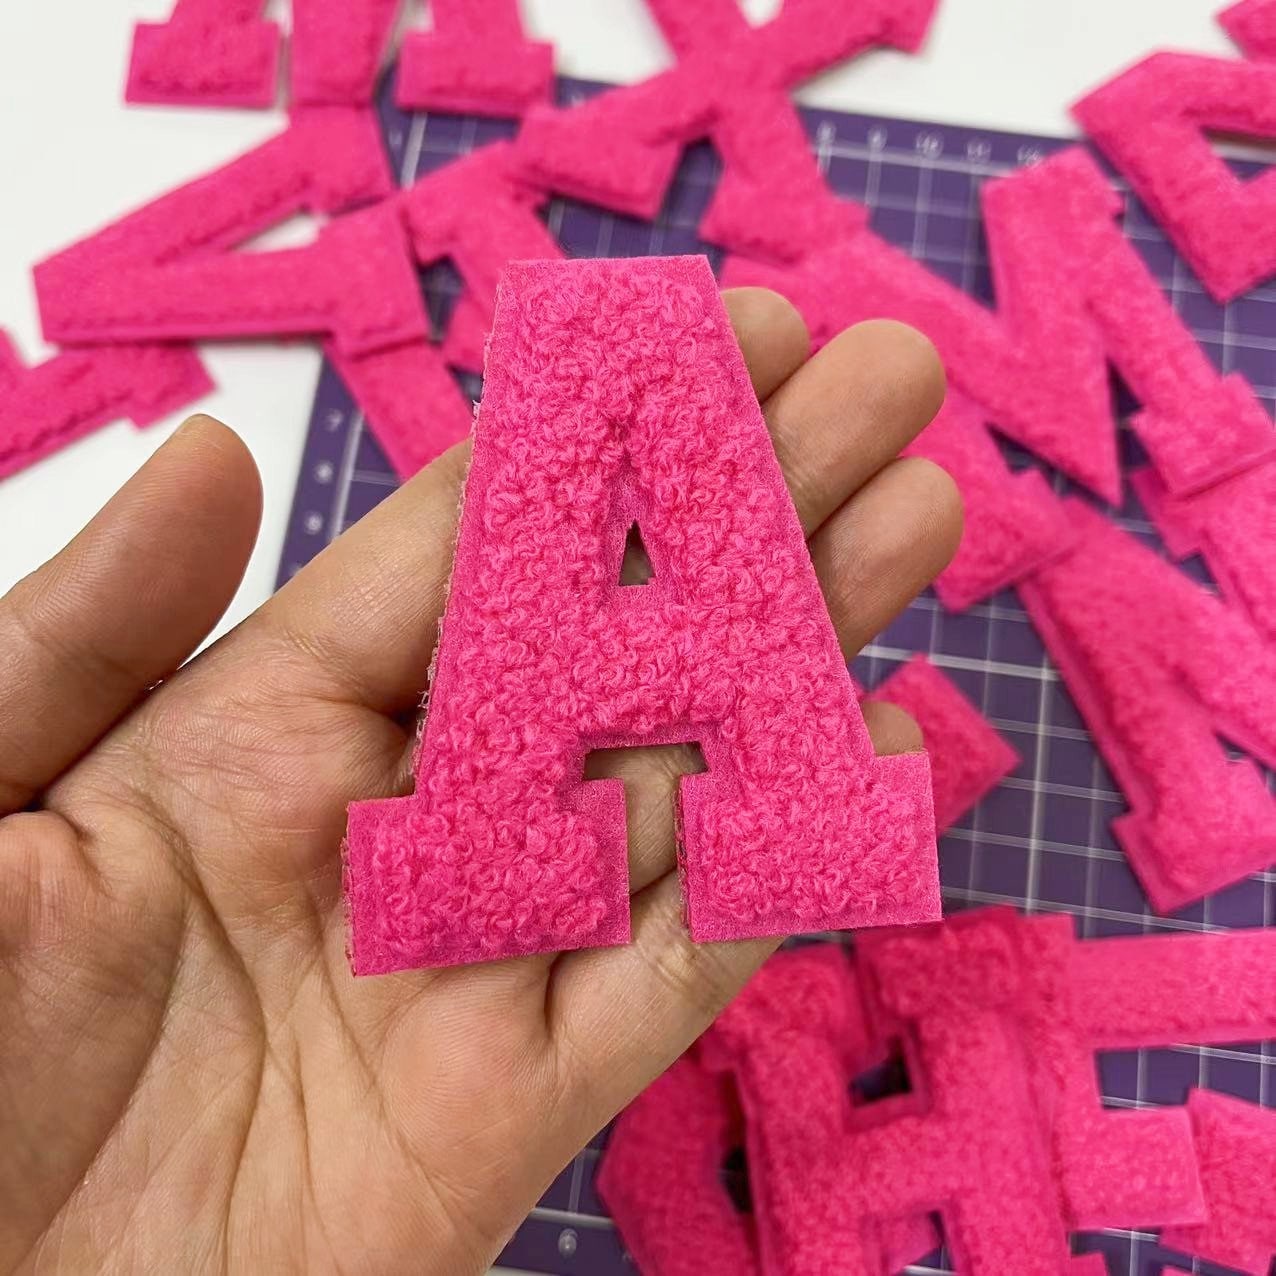 Magenta Bright Pink Glitter Letter Number Stickers, Craft BUJO Alphabet  Stickers, Craft Project Letters Sticker BBB Supplies R-E015 